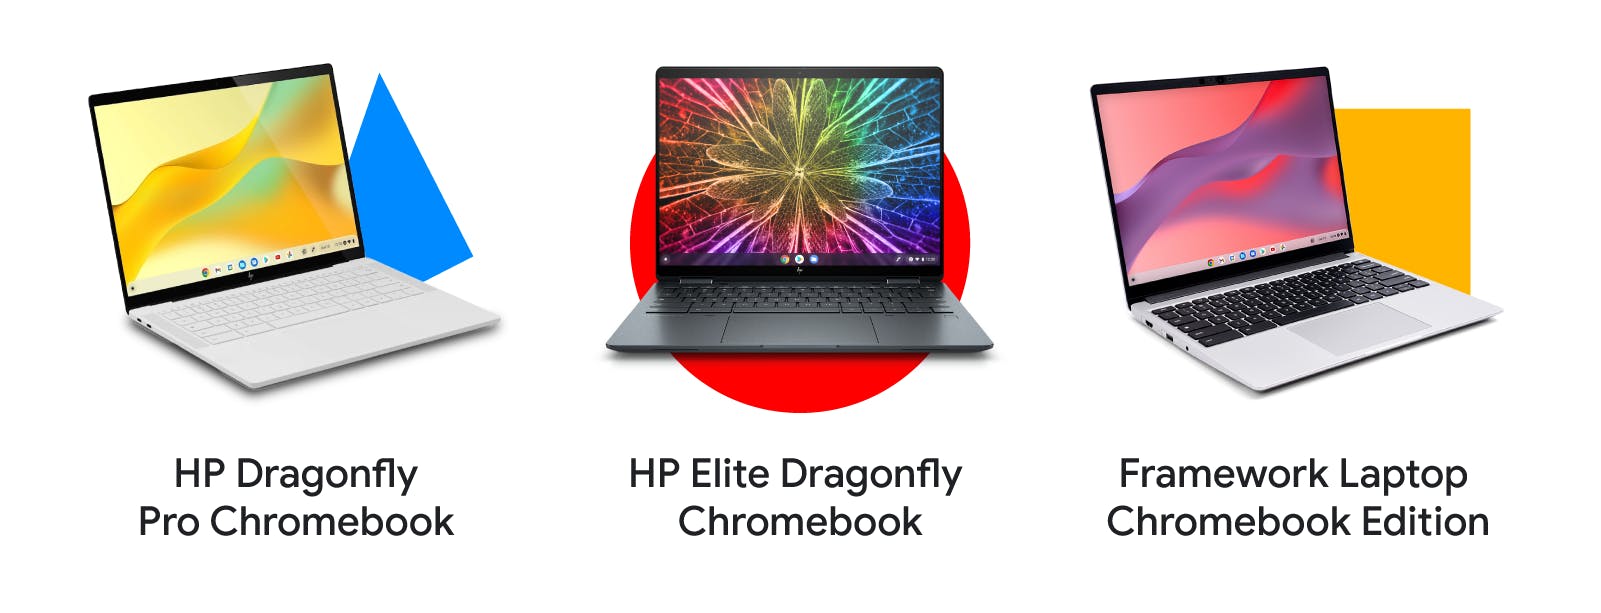 Three devices from left to right: the HP Dragonfly Pro Chromebook, HP Elite Dragonfly Chromebook, and Framework Laptop Chromebook Edition